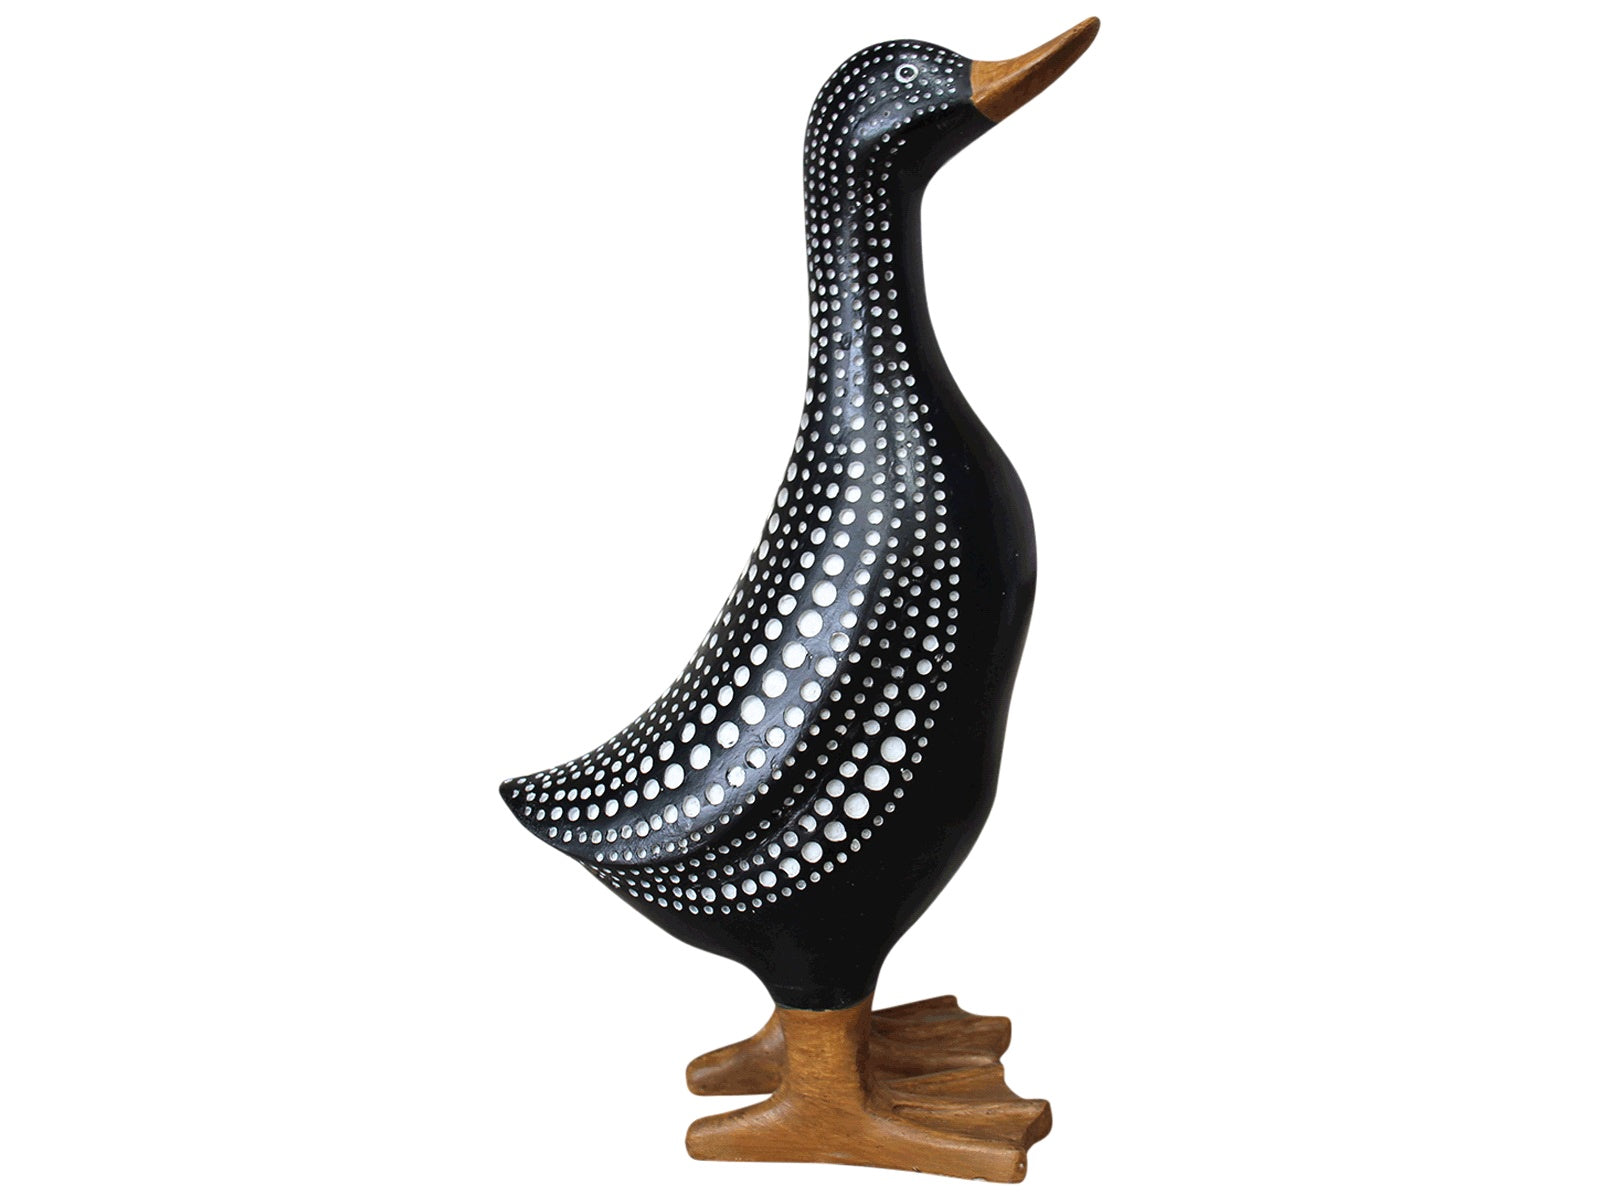 Tall Black Duck with White Dots